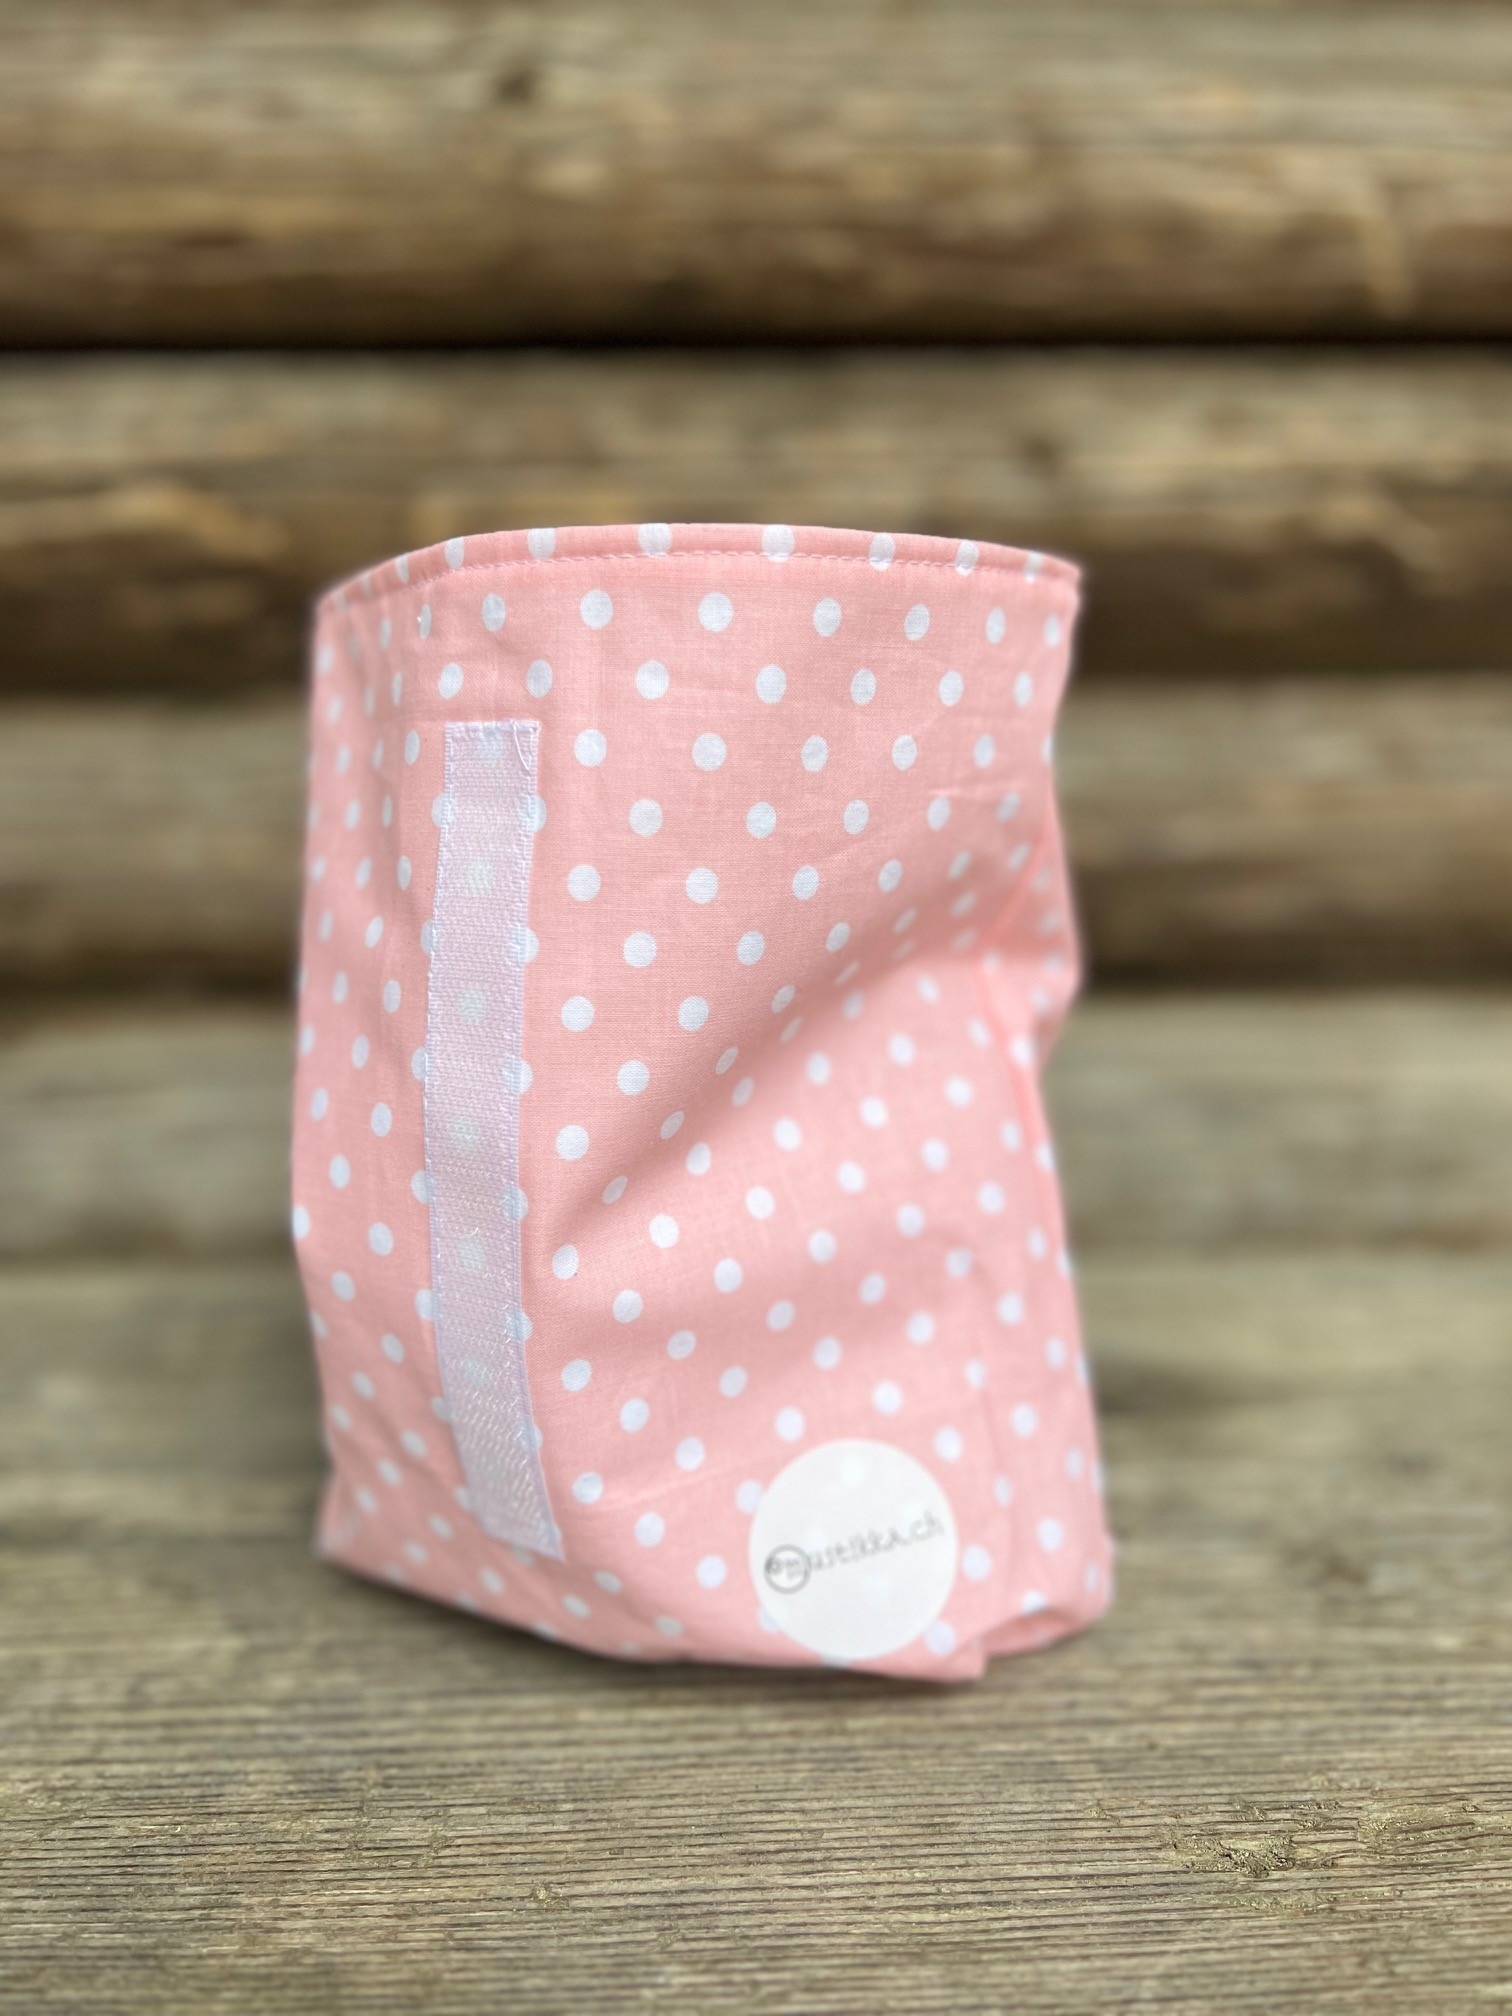 Lunch bag pink - upcycled!